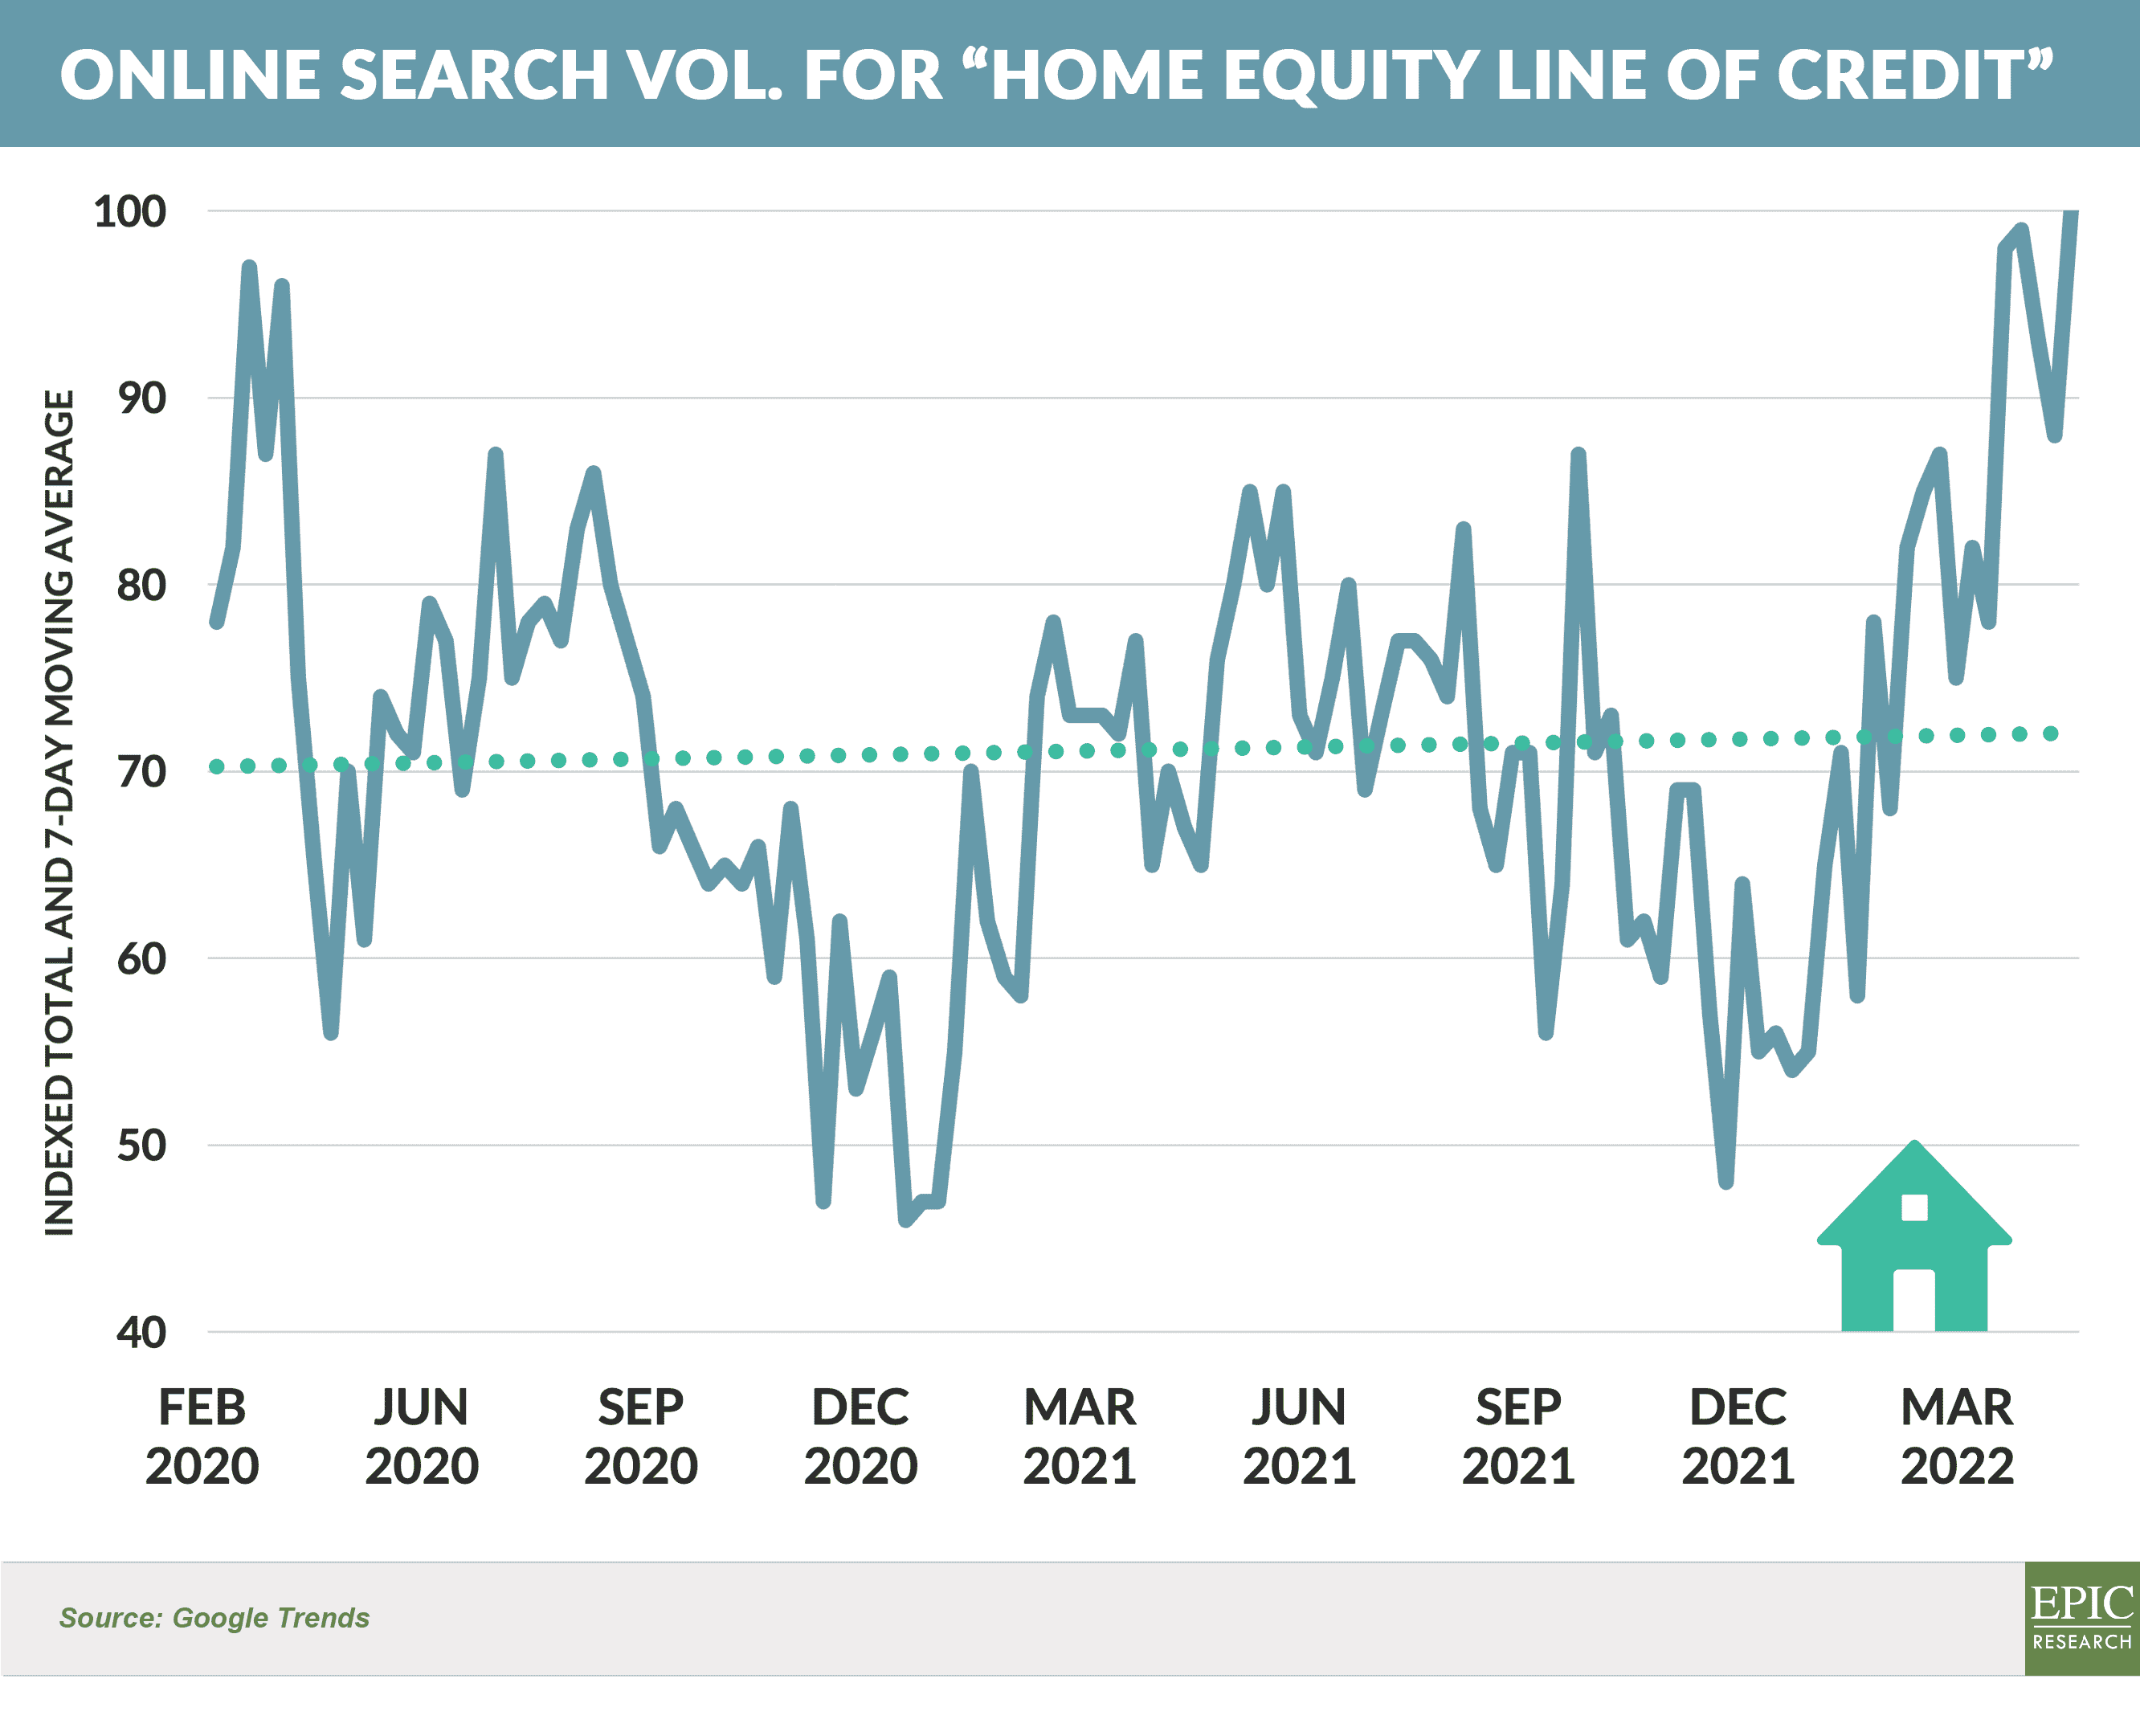 Online Search Vol. for Home Equity Line of Credit